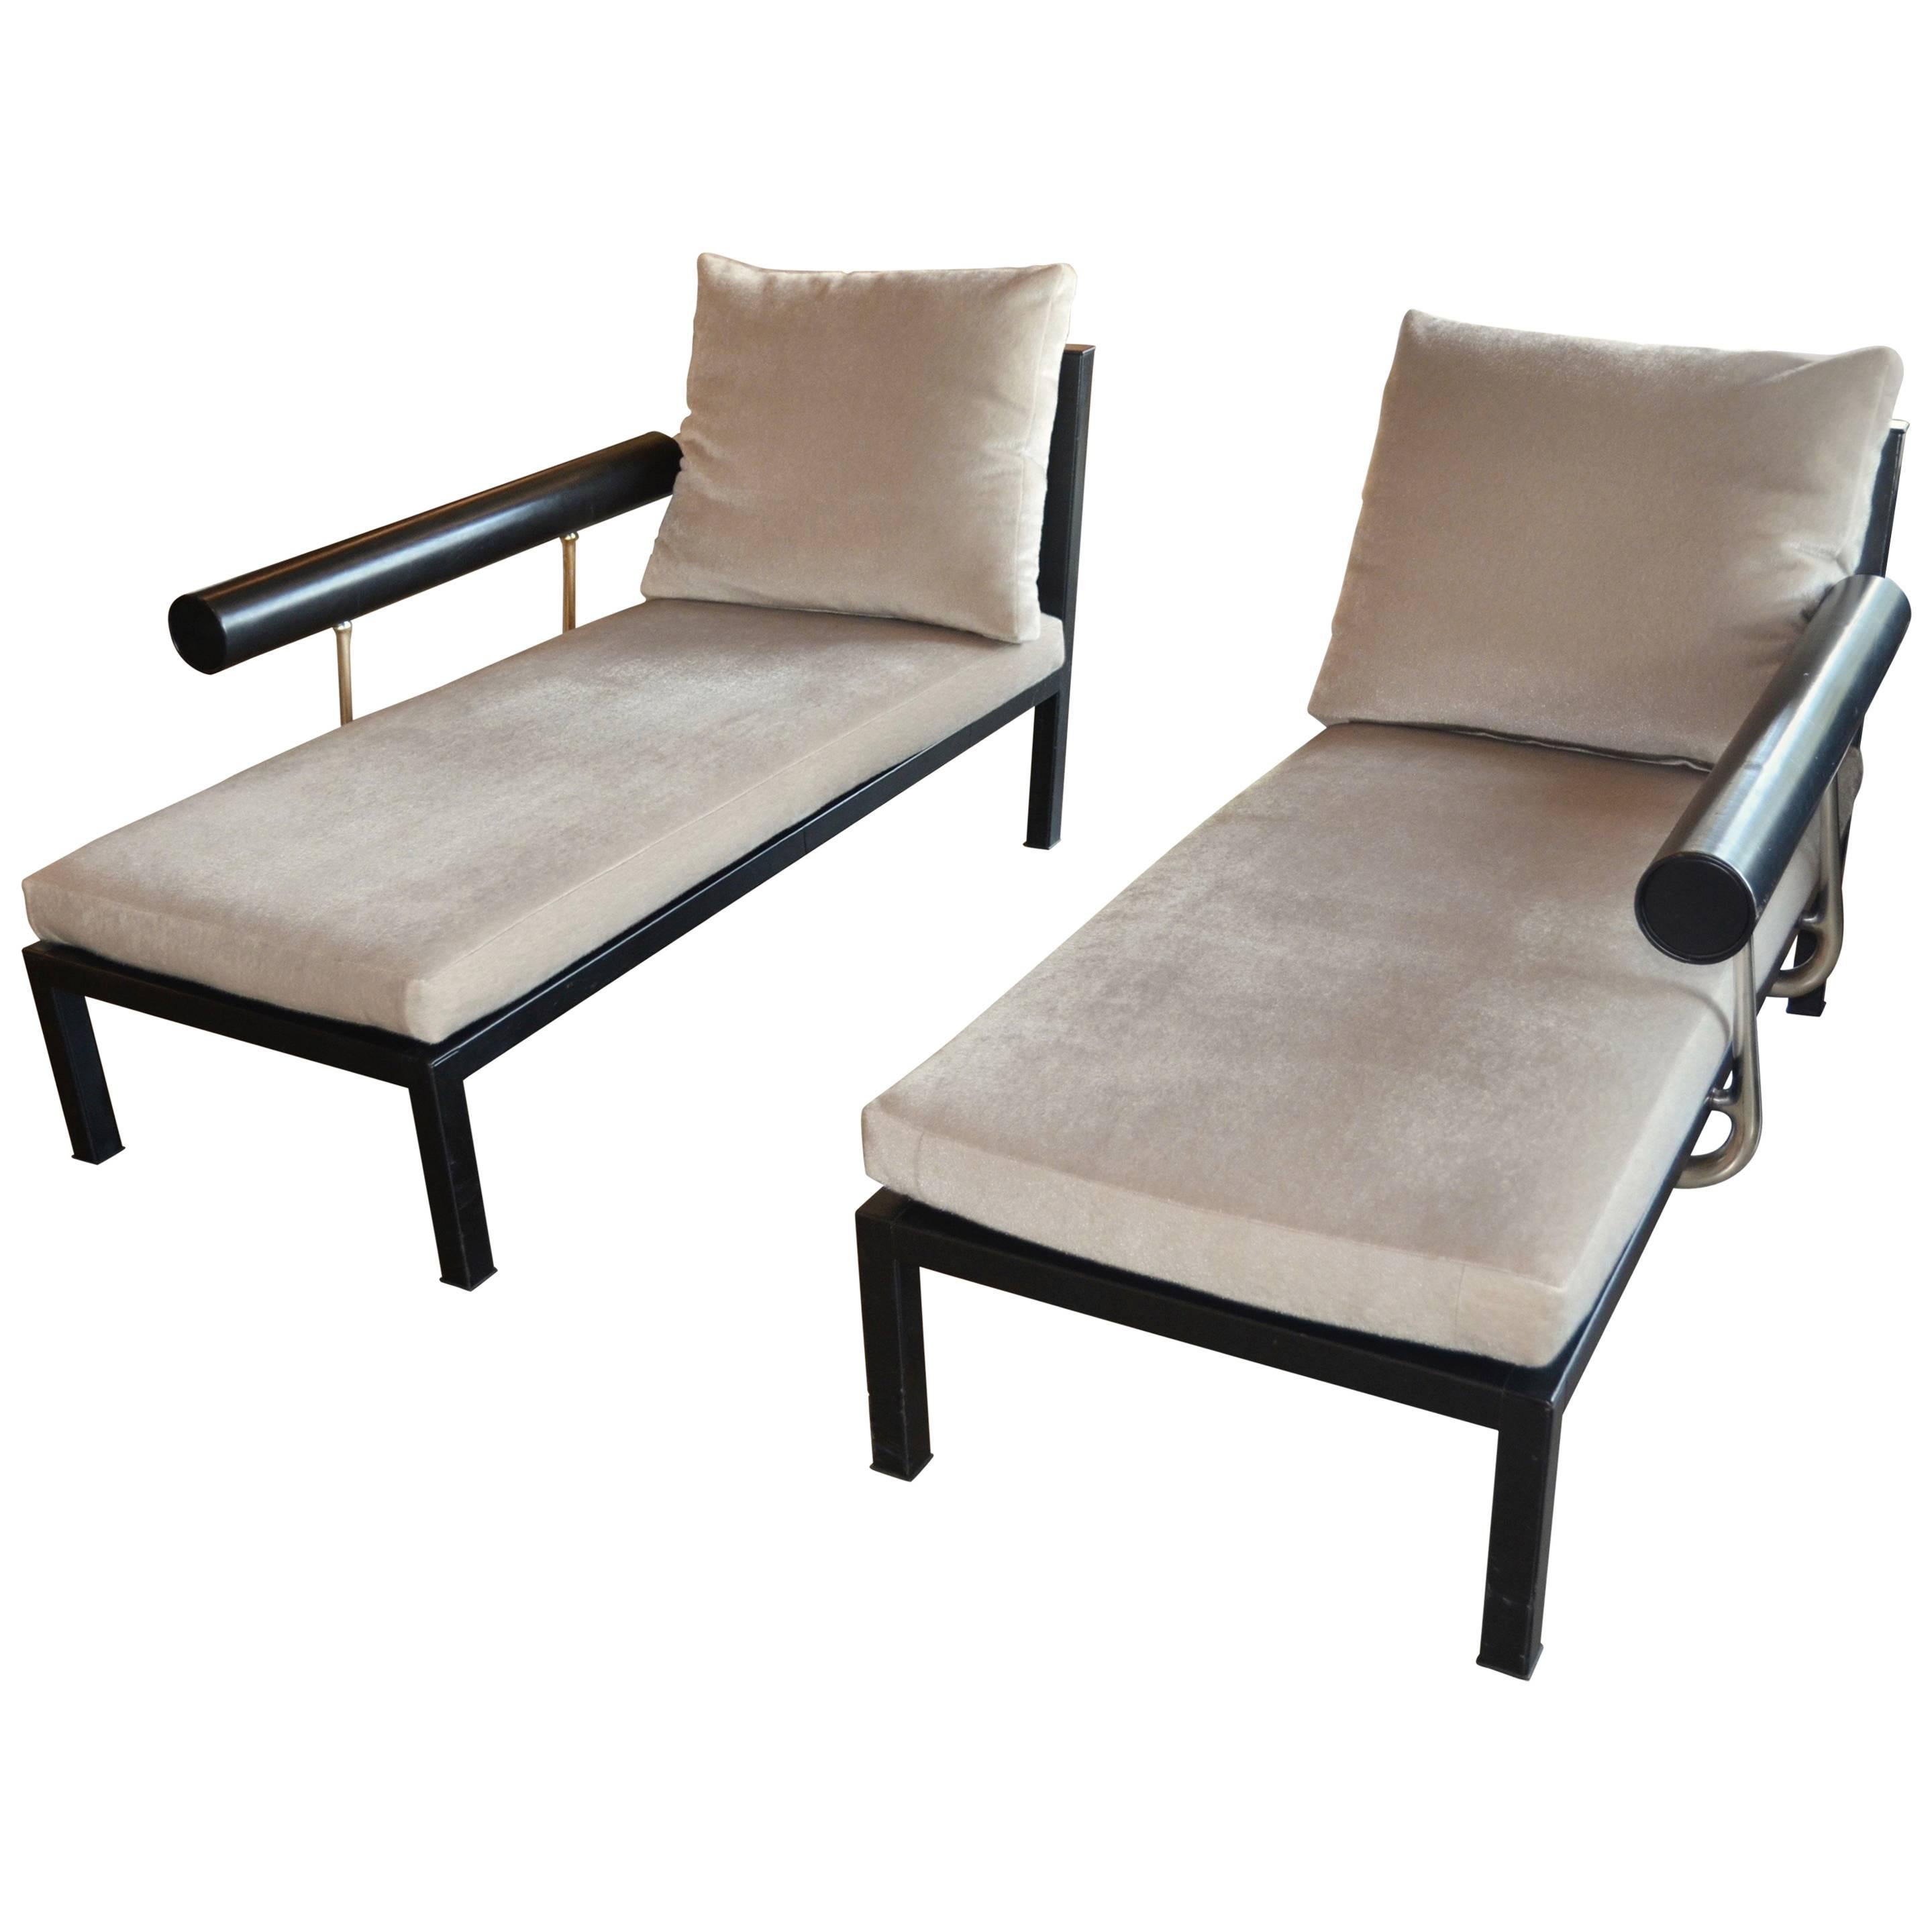 Antonio Citterio for B&B Italia Chaises in Leather and Mohair, One Available 